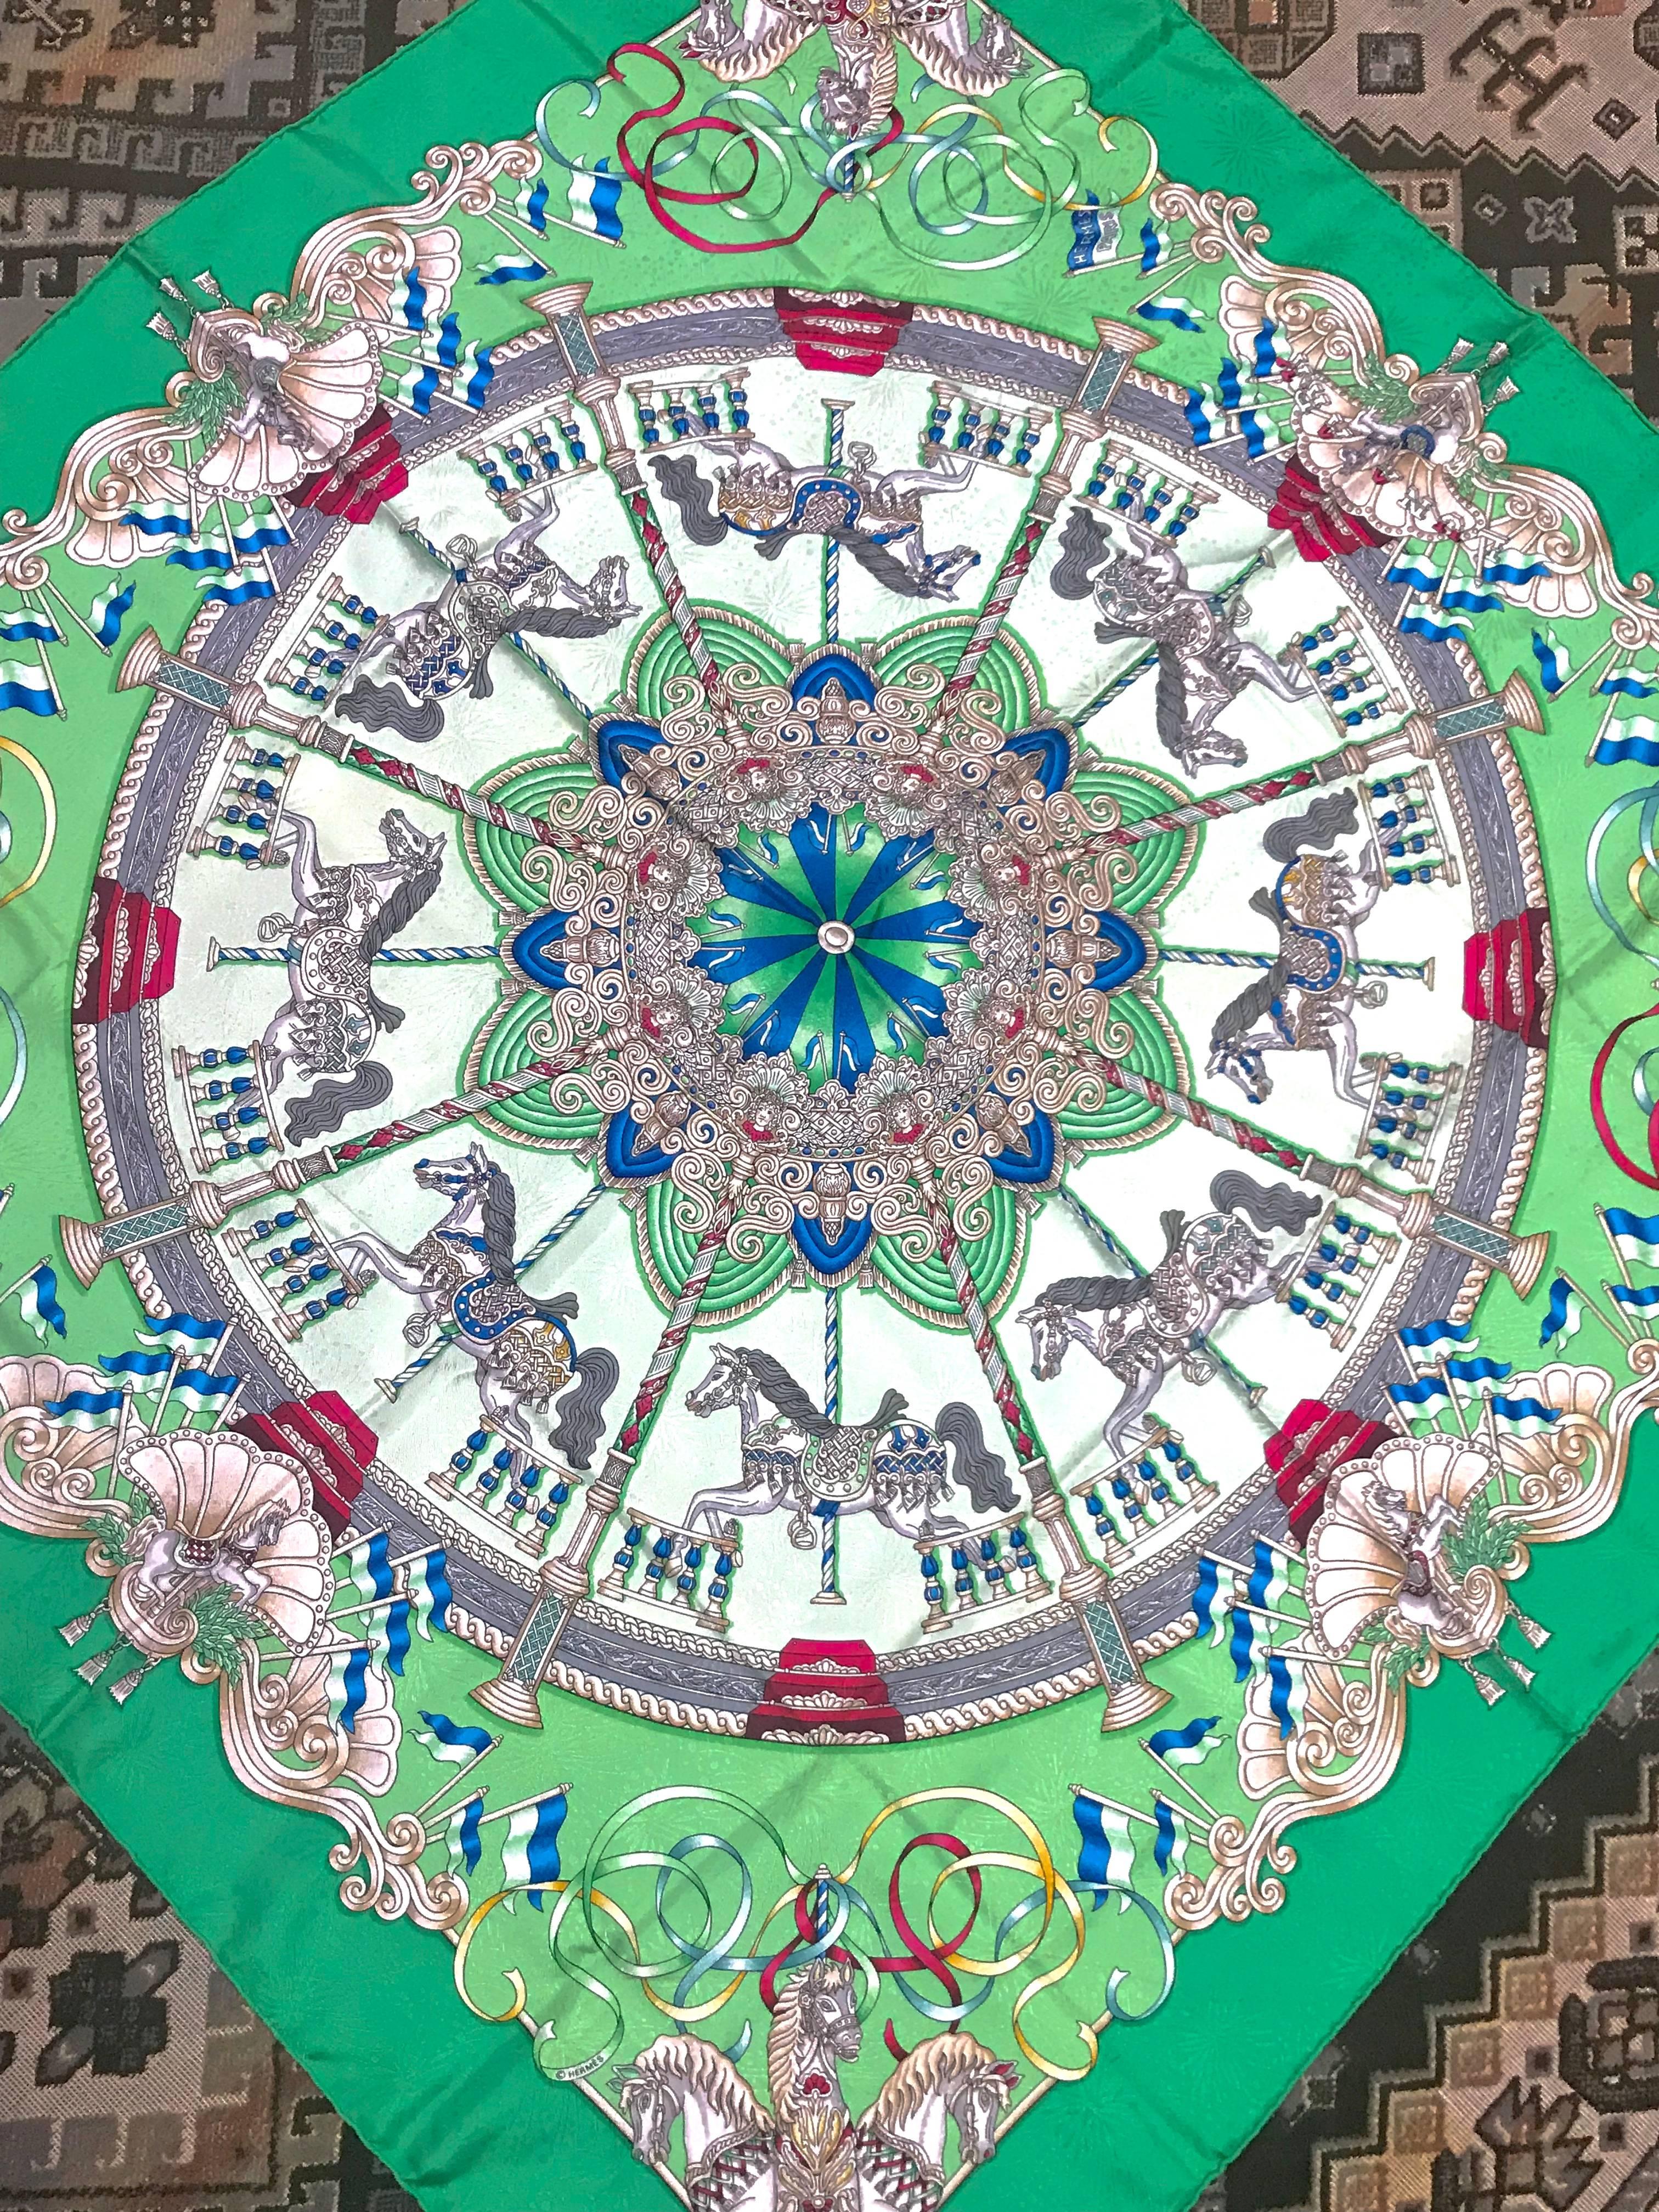 1990s. Vintage HERMES Carre large silk scarf with horse, Carousel print in green, blue, wine, multicolor. Classic foulard. LUNA PARK.

This is a 100% twill, large size silk Carre scarf, 